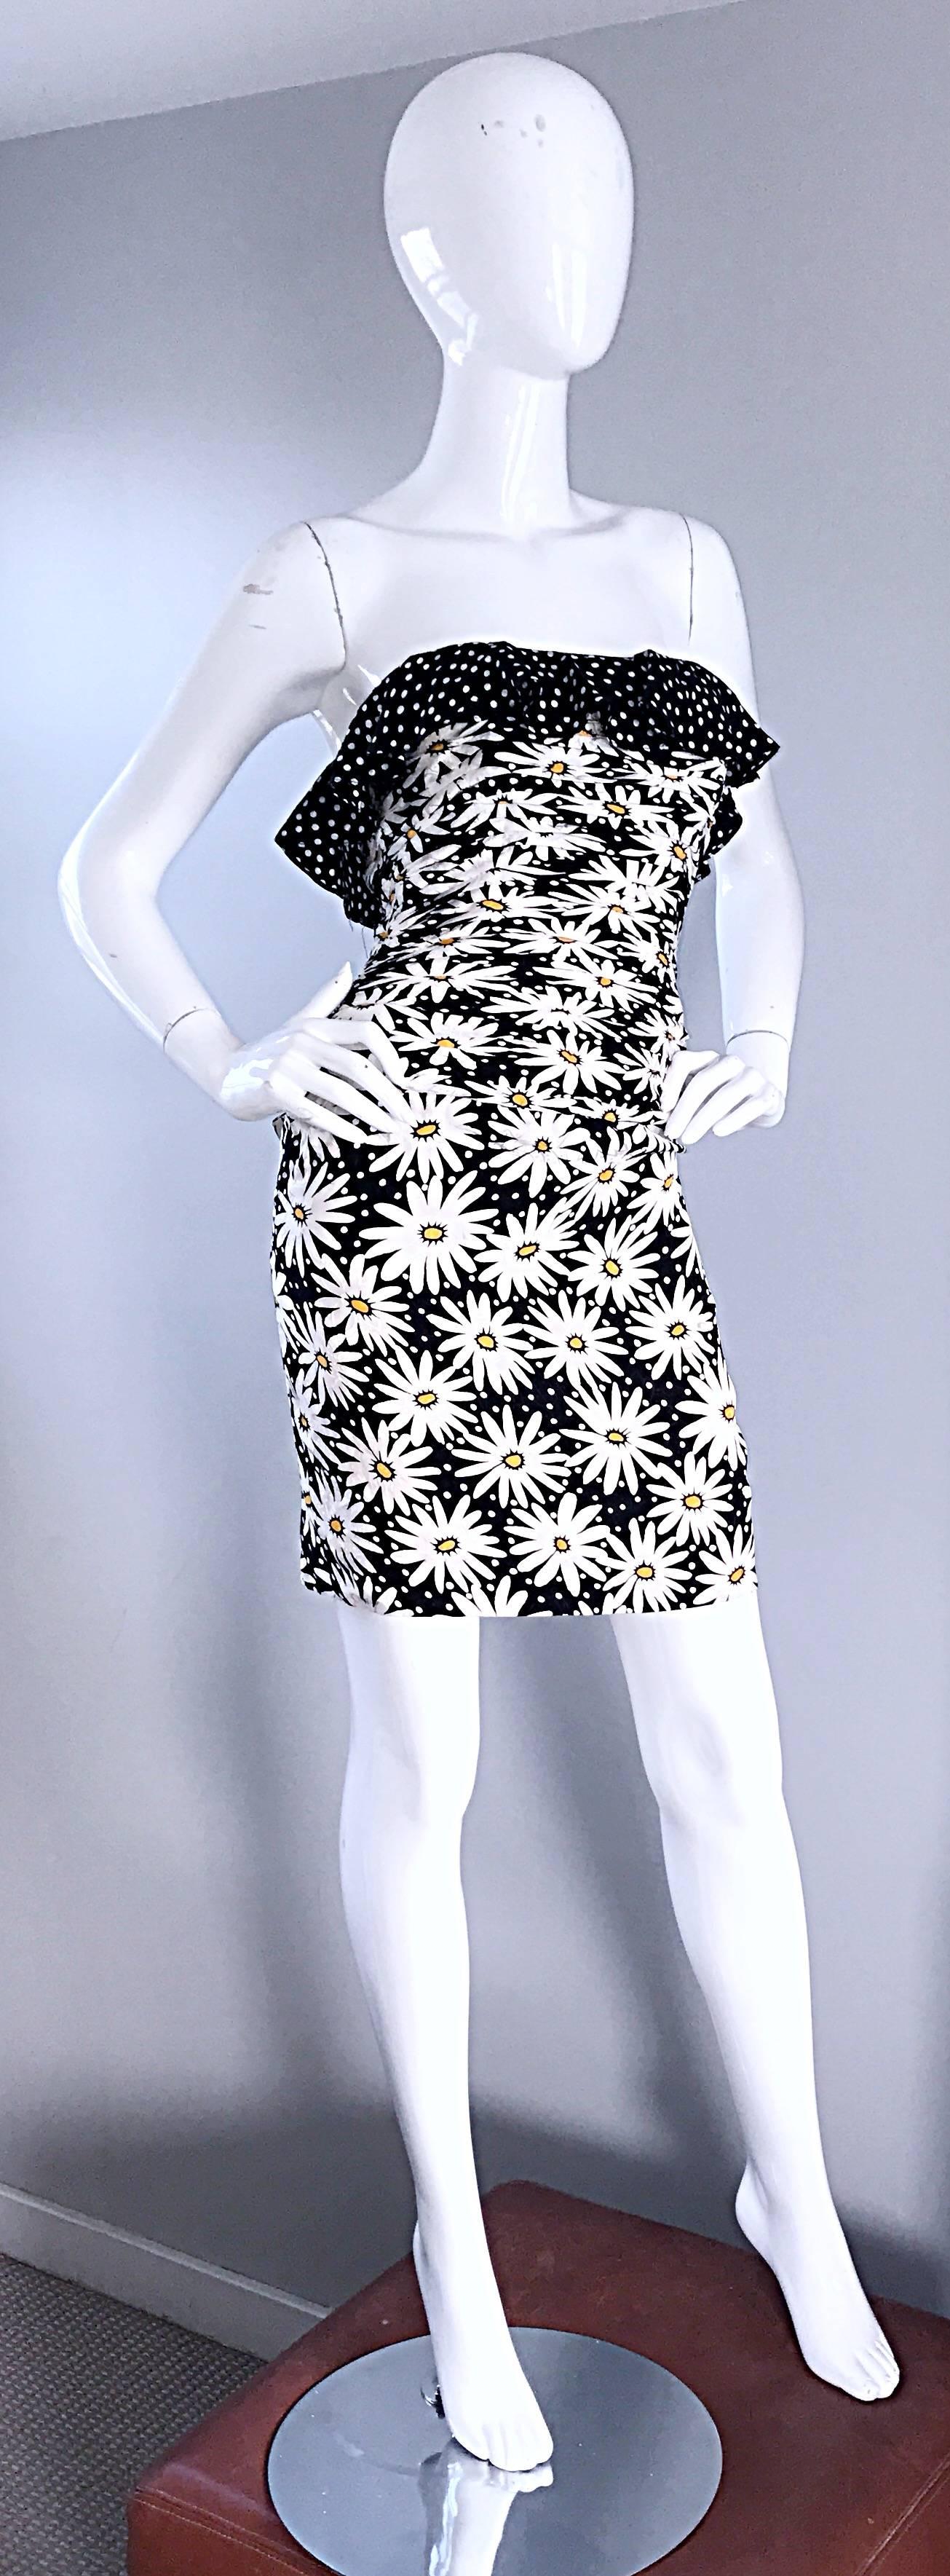 Fabulous Vintage 80s Black and White Daisy Polka Dot Print Sz 4 Strapless Dress  In Excellent Condition For Sale In San Diego, CA